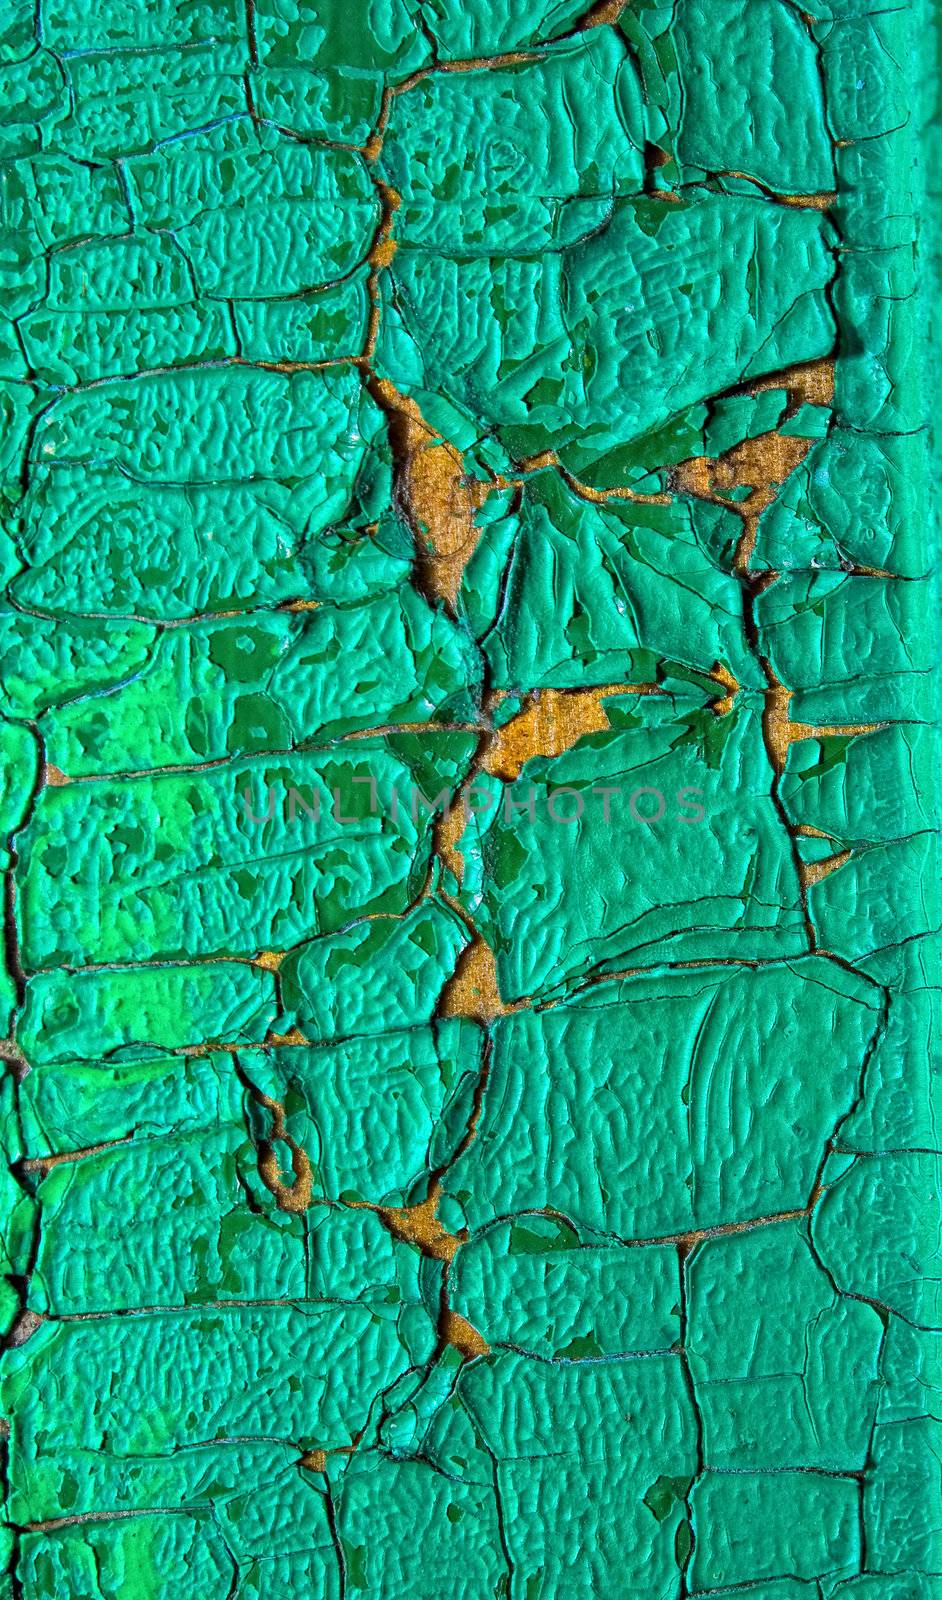 texture of old paint on wood and stone